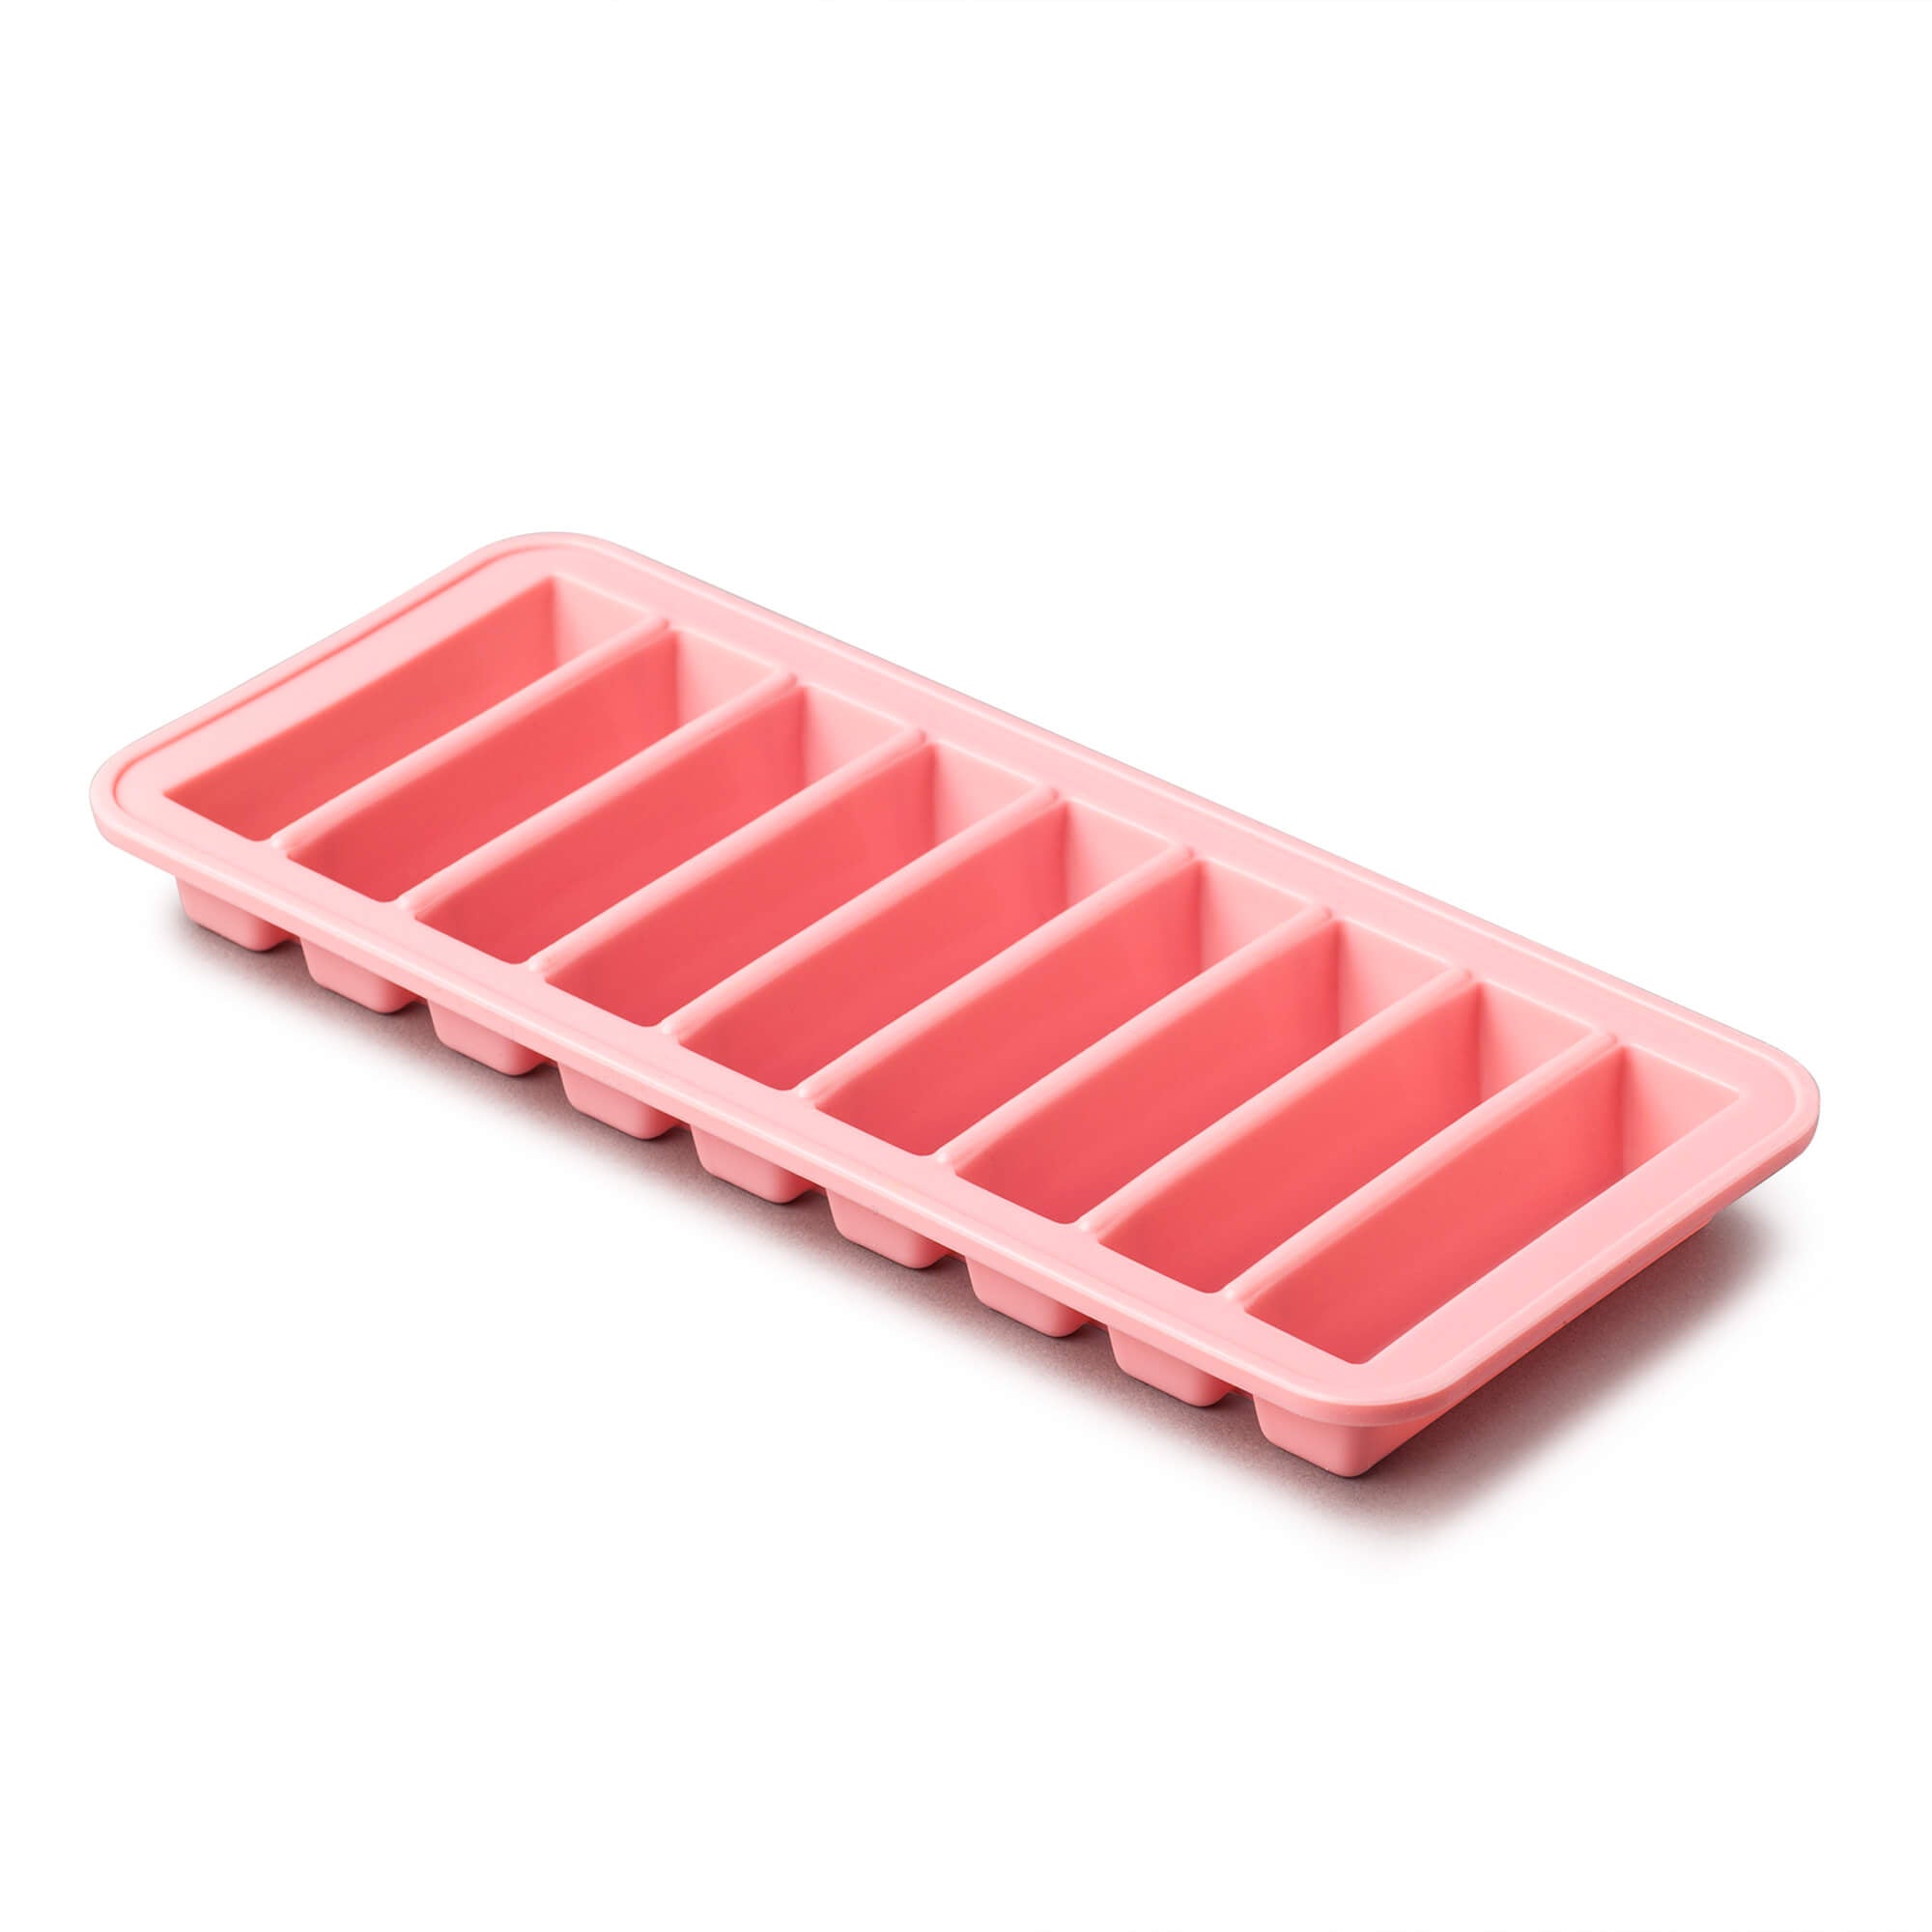 Silicone Baby Food Freezer Tray - Pink or Blue Zeal Silicone Style